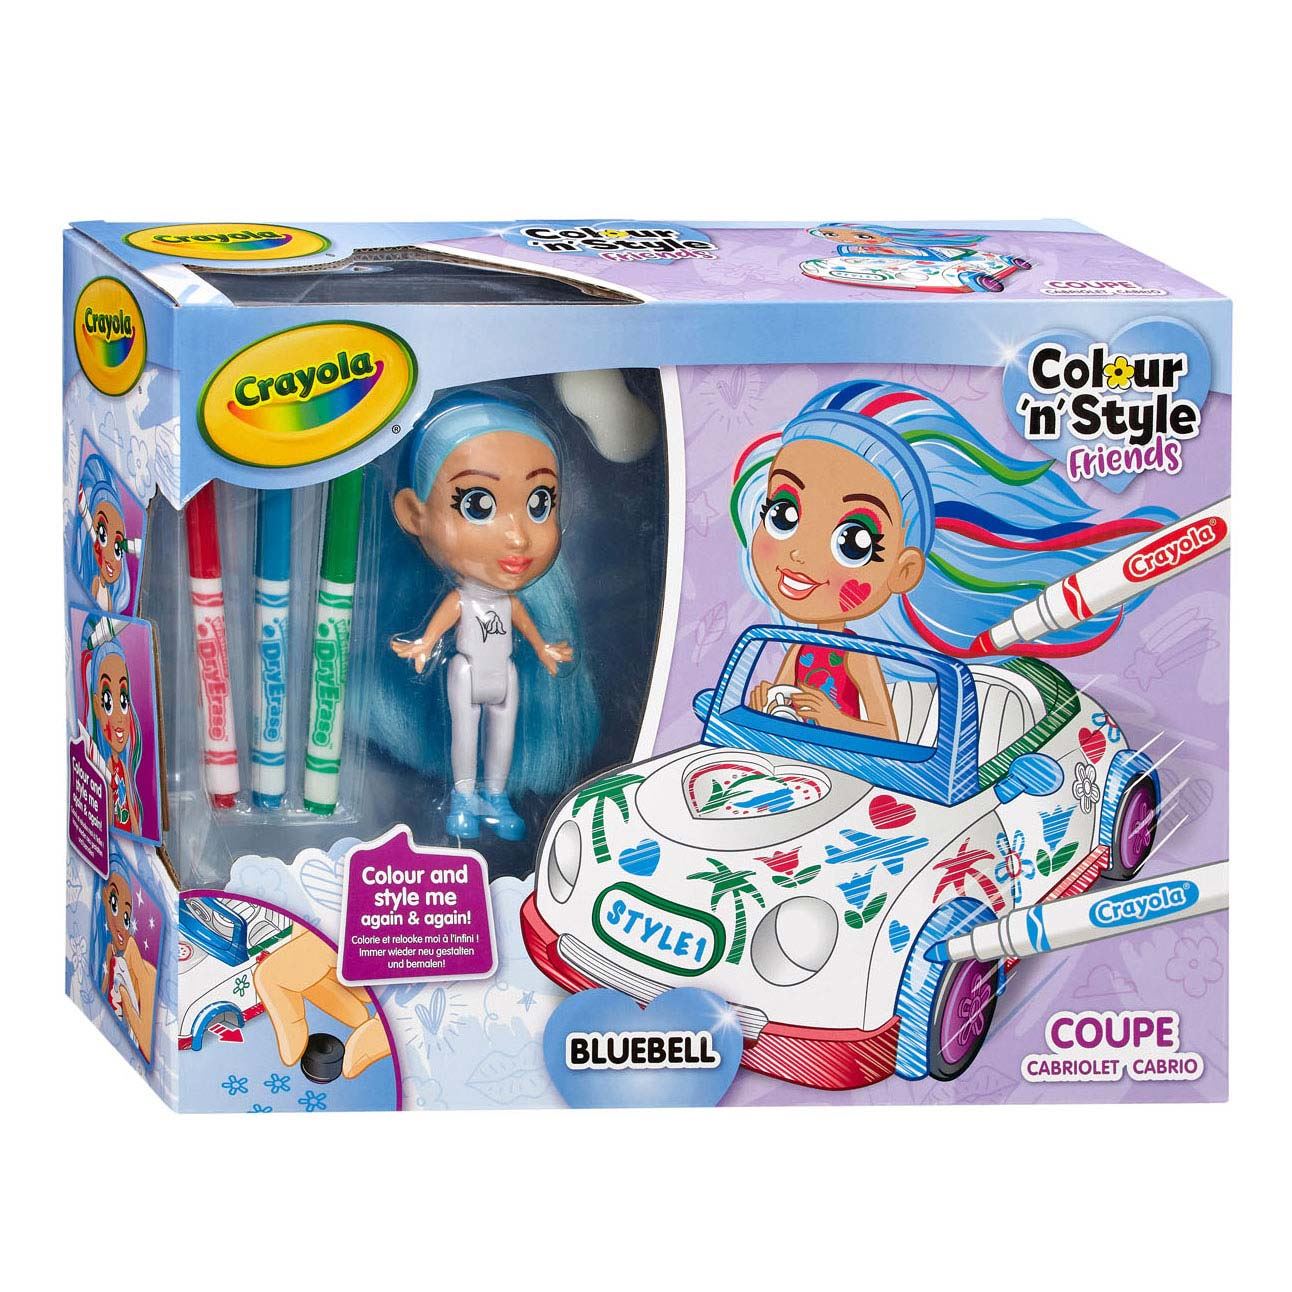 CRAYOLA Colour 'n' Style Friends Coupe BLUEBELL Doll Art Playset Color